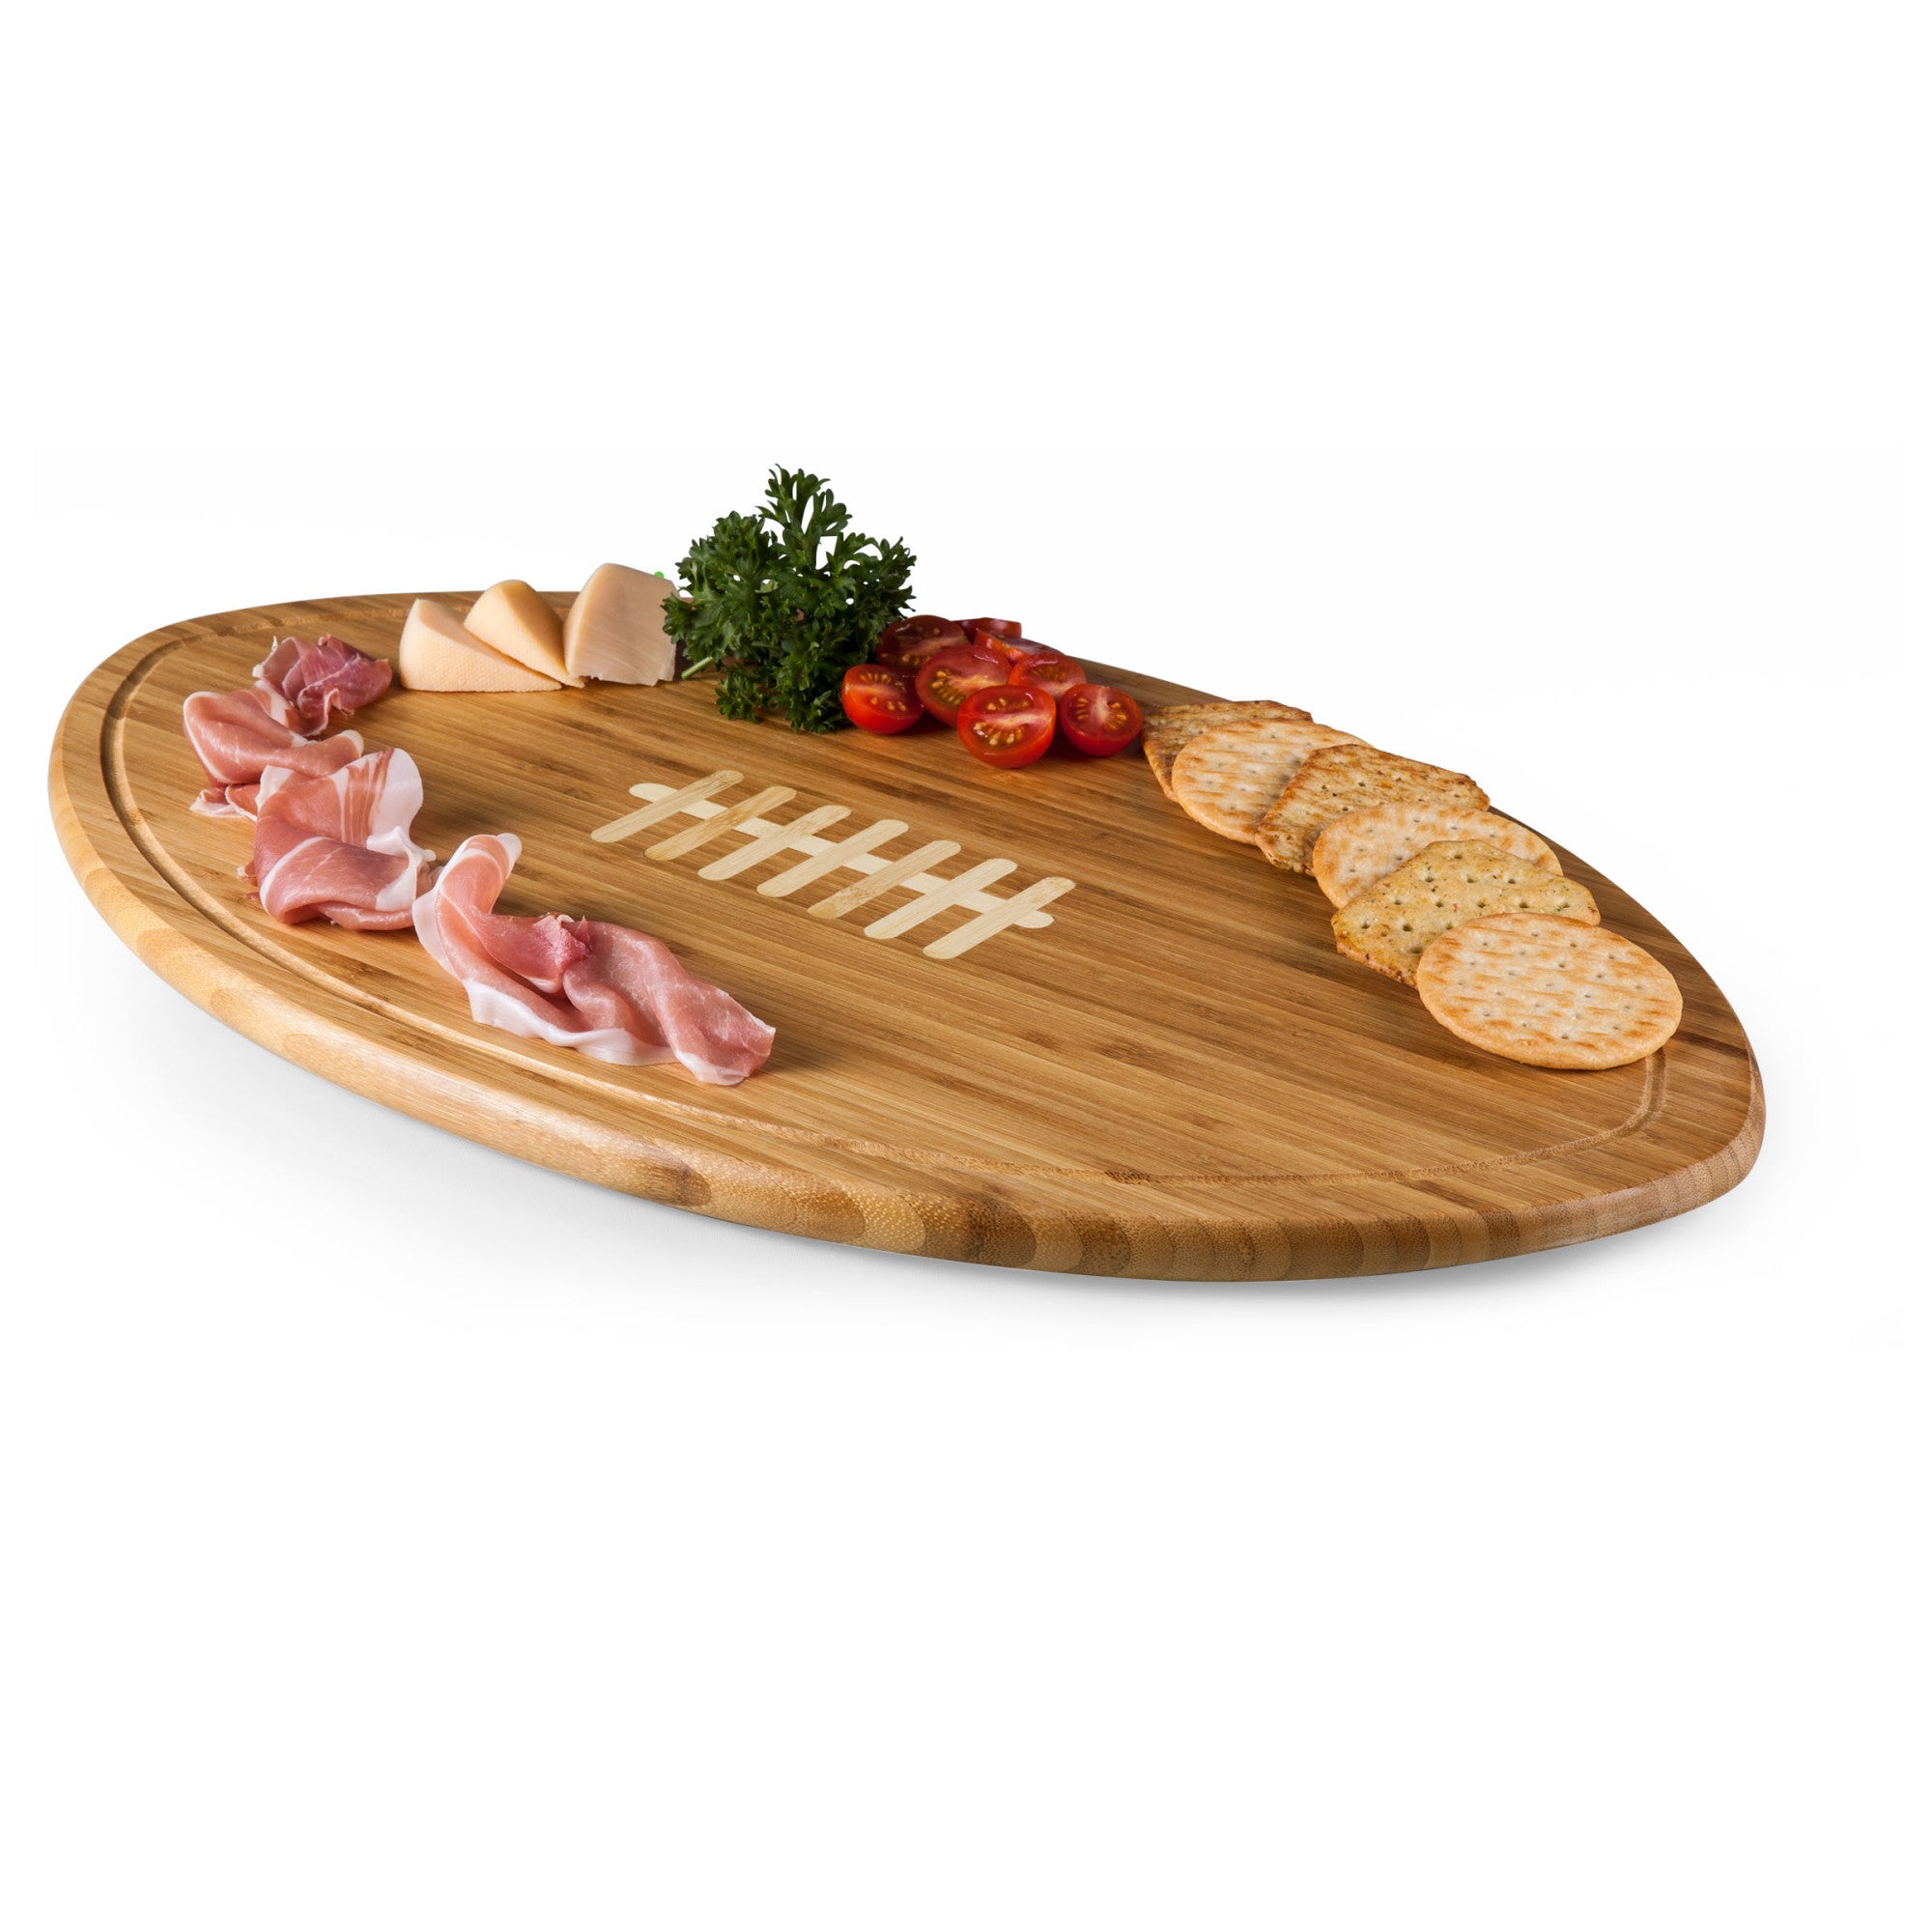 Miami Dolphins - Kickoff Football Cutting Board & Serving Tray